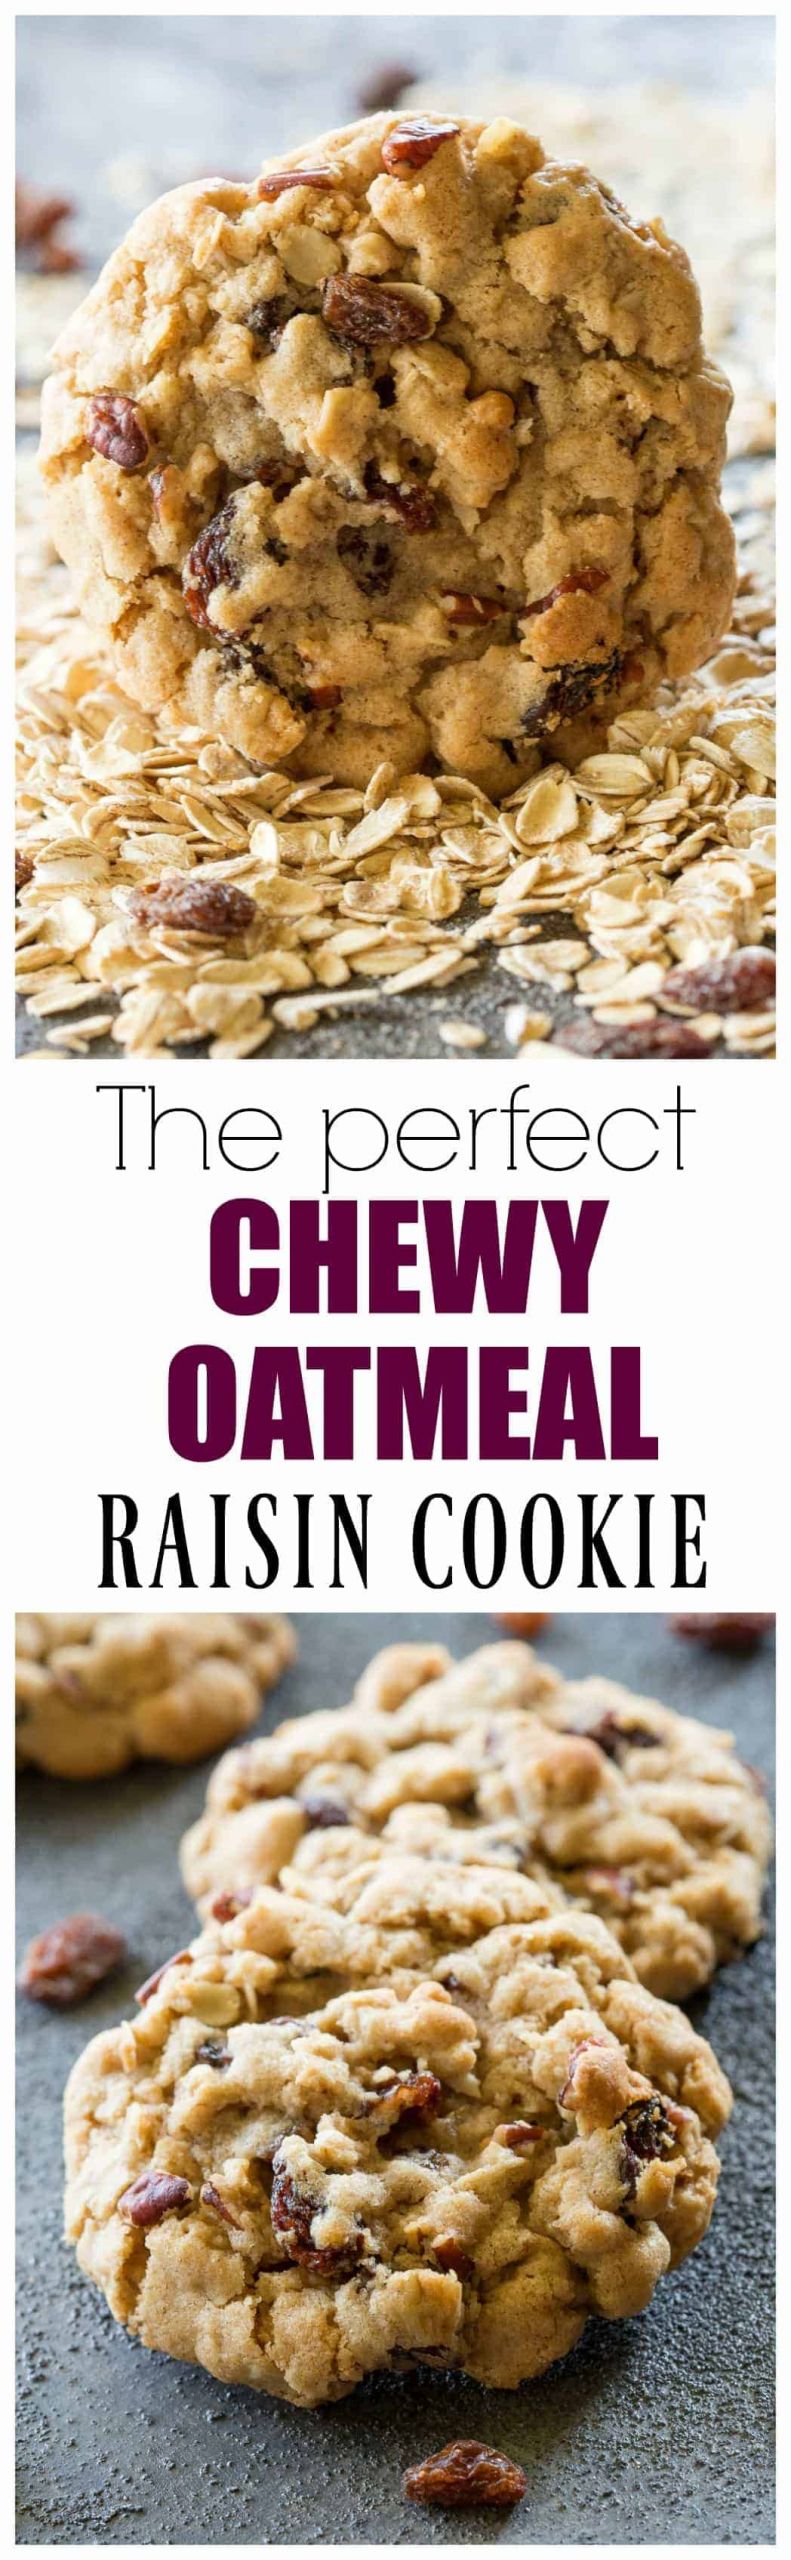 Oatmeal Raisin Cookies Chewy
 Chewy Oatmeal Raisin Cookie The Girl Who Ate Everything